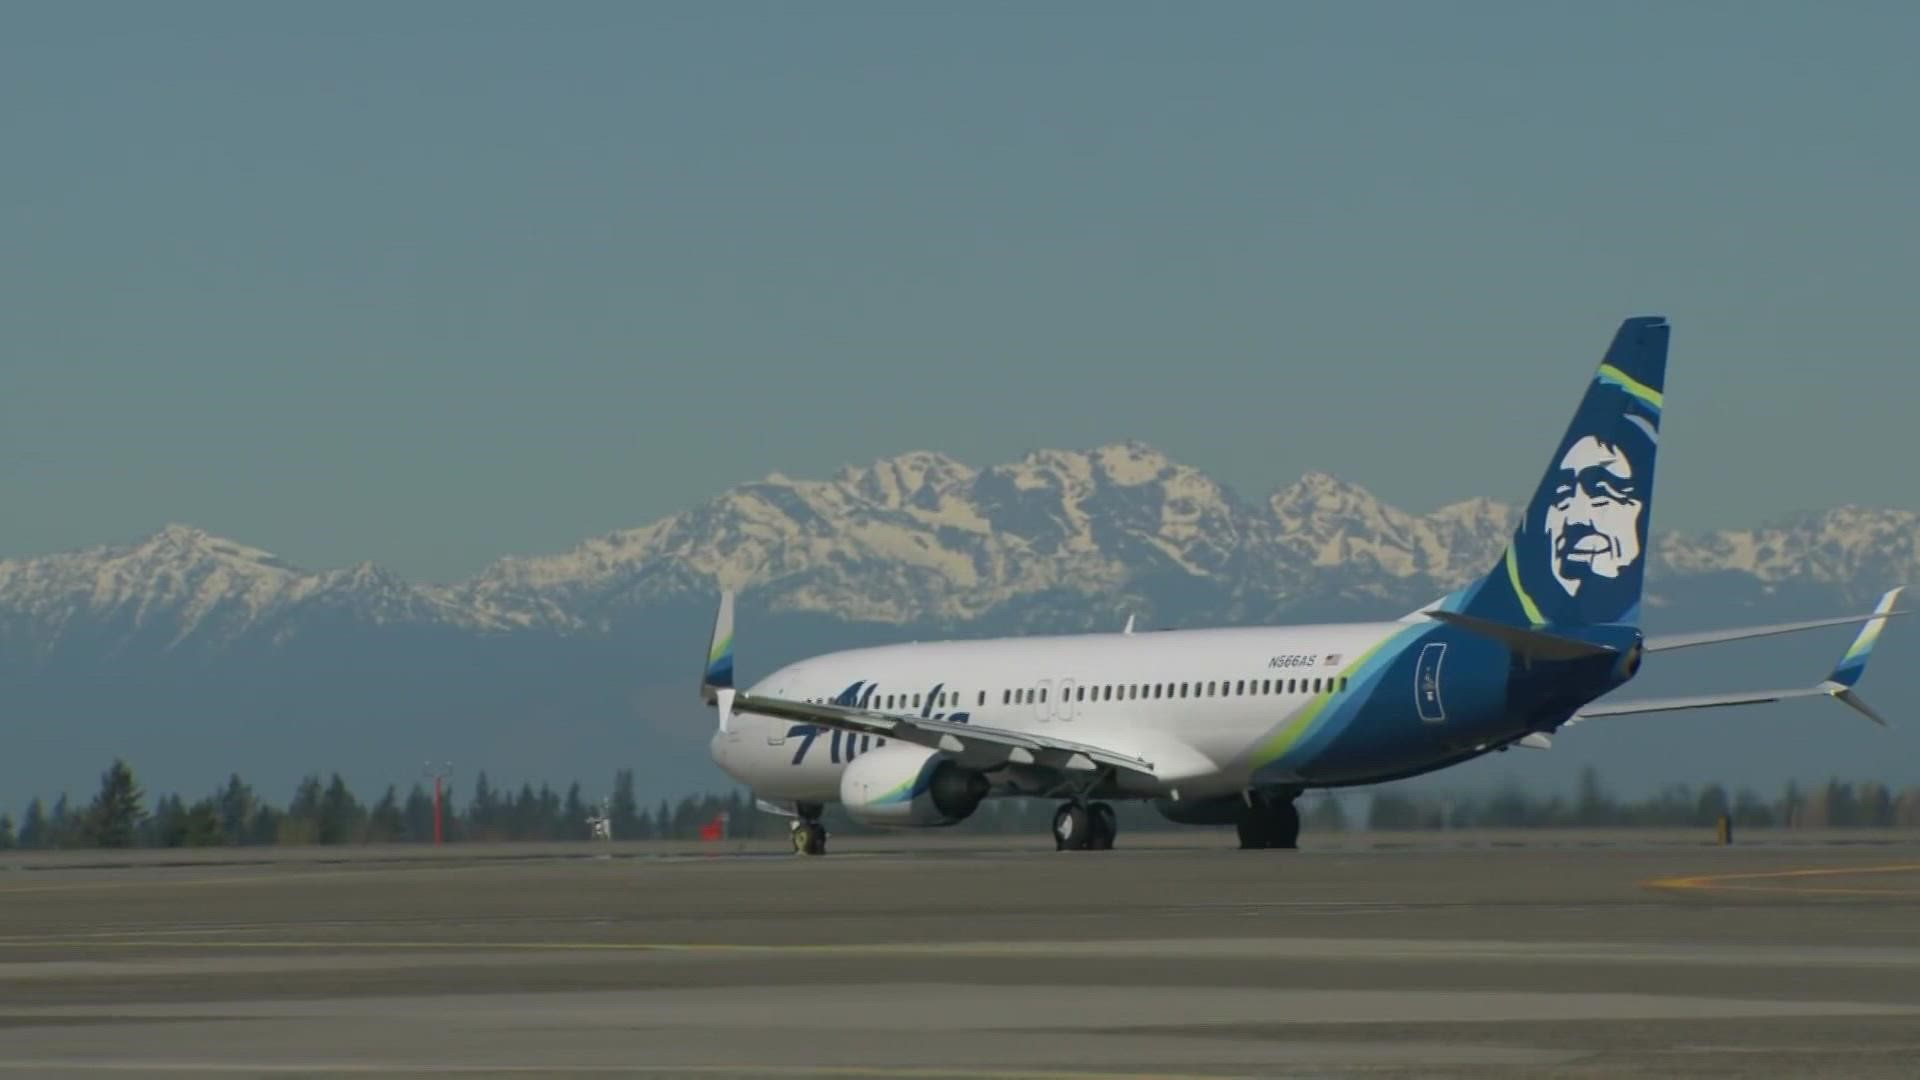 Alaska Airlines pilots are a few days away from voting on a potential strike as flight cancellations pile up